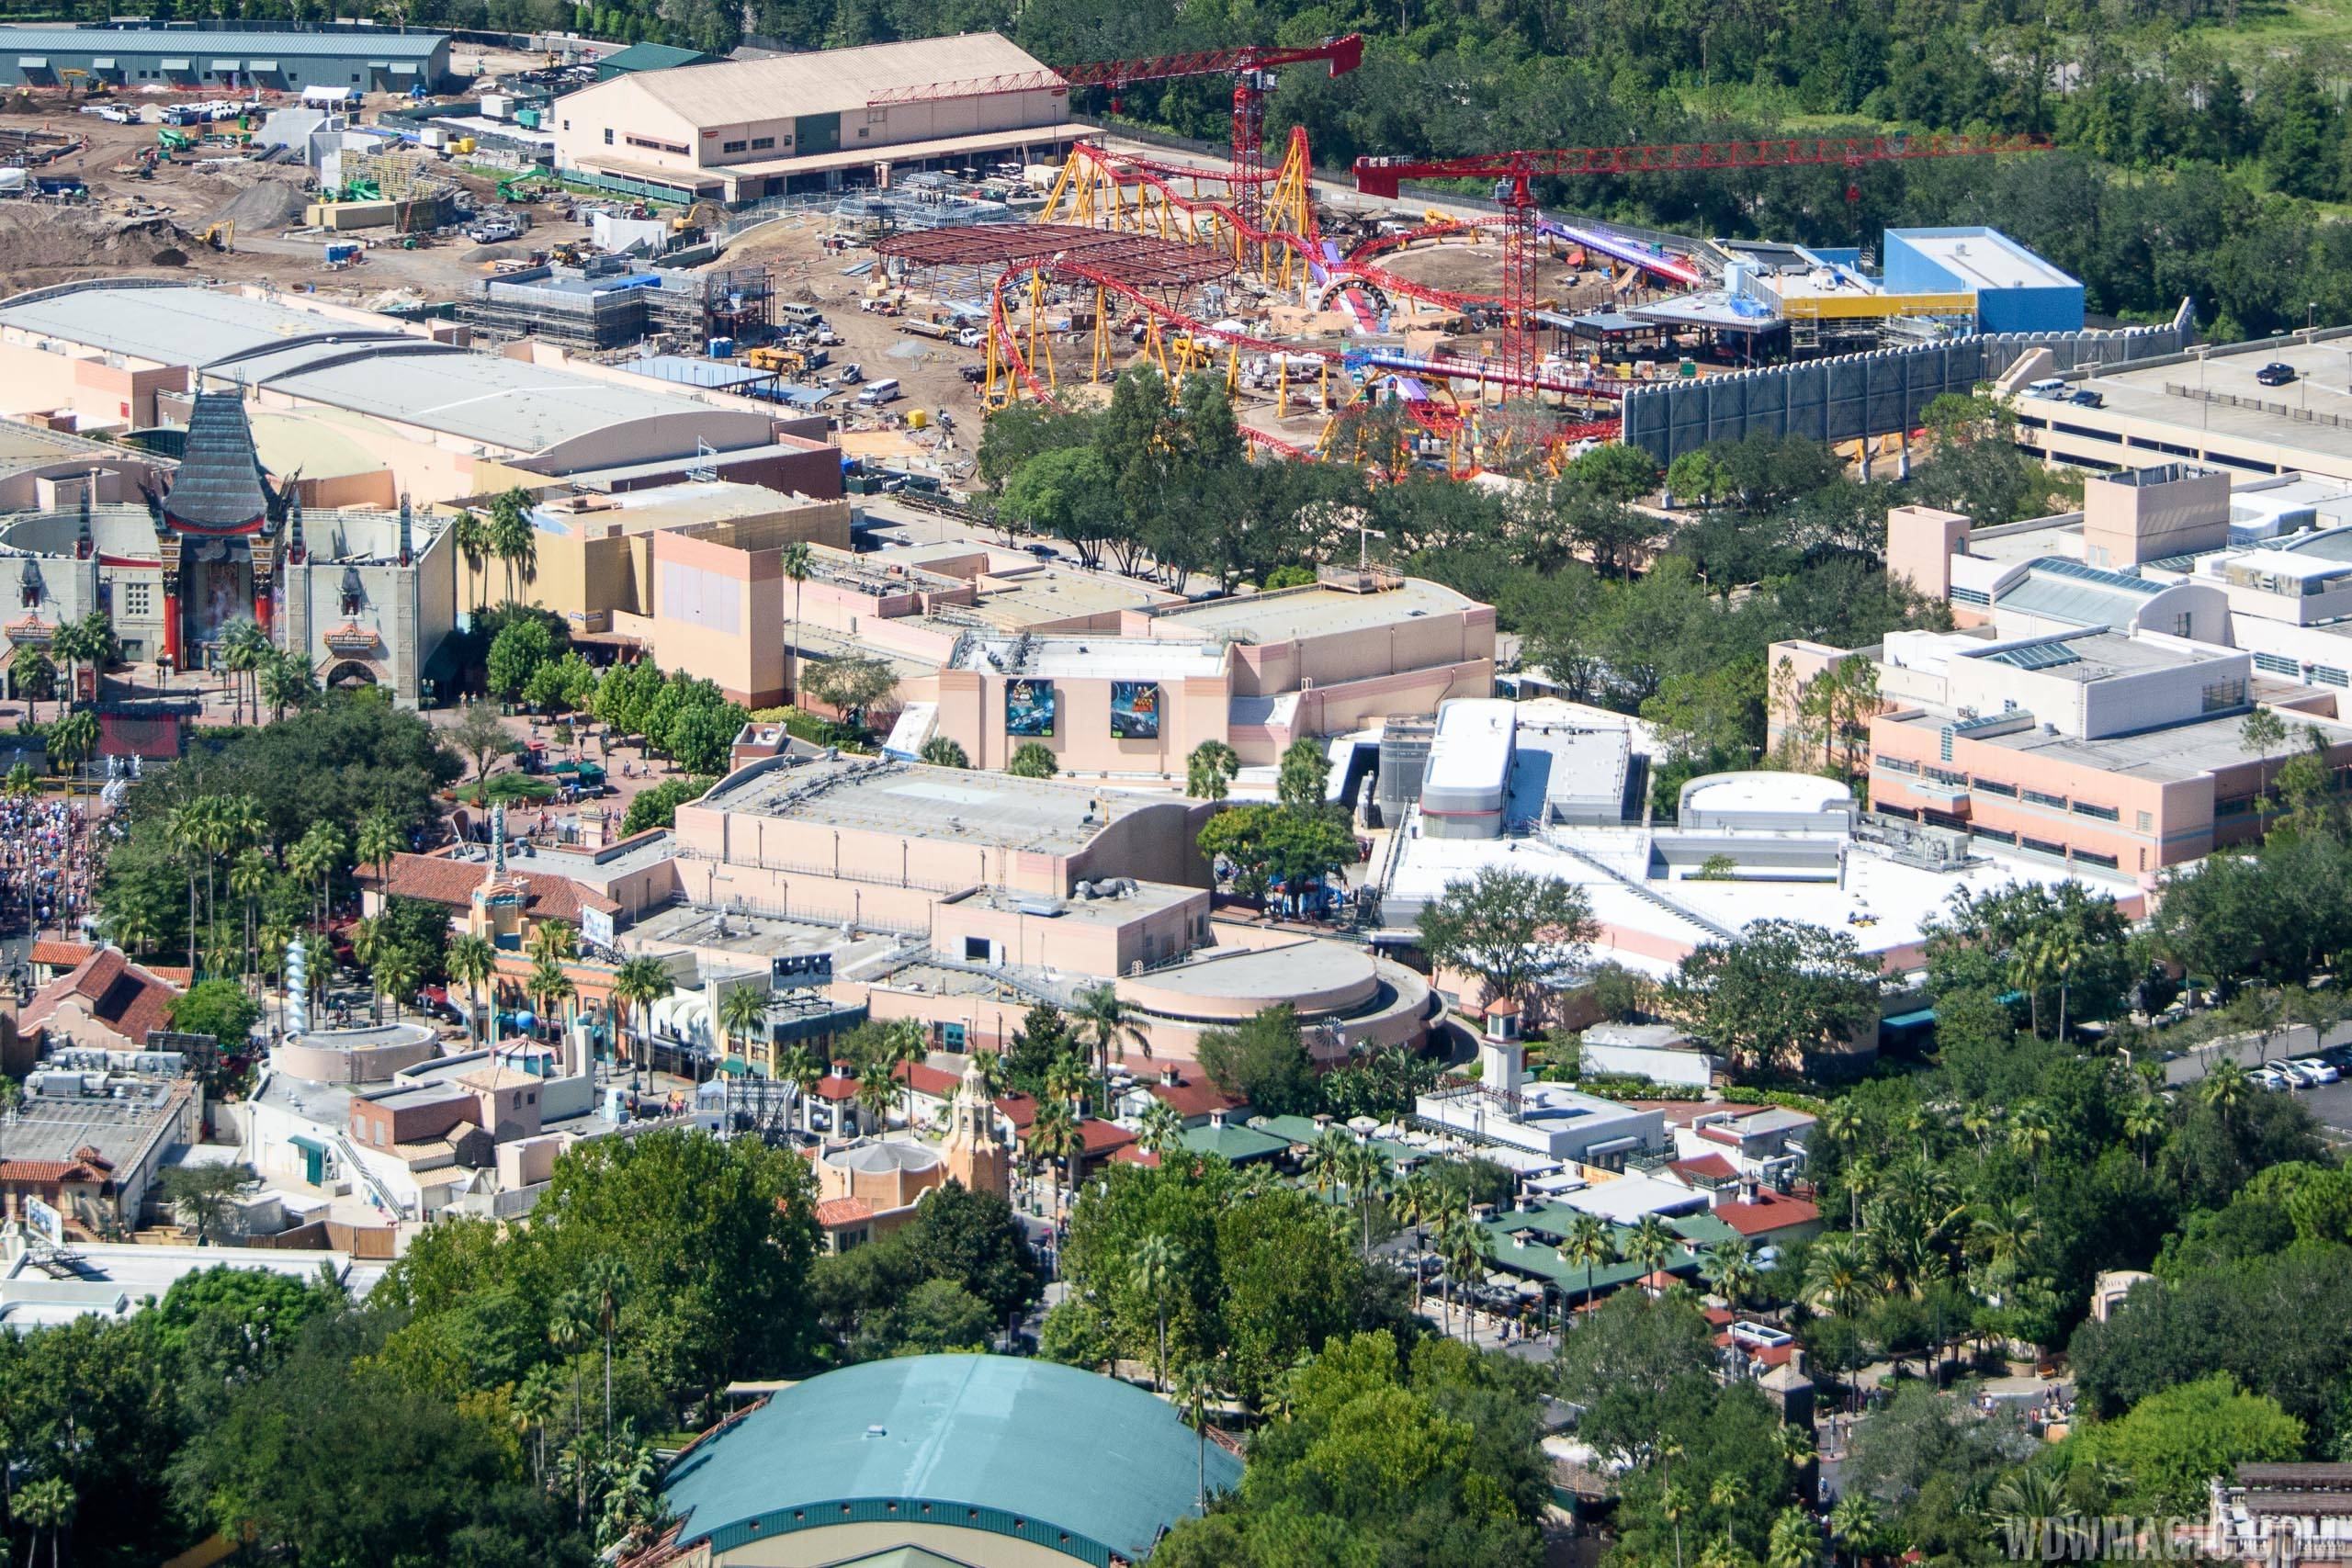 PHOTOS - Latest look at Toy Story Land from the air